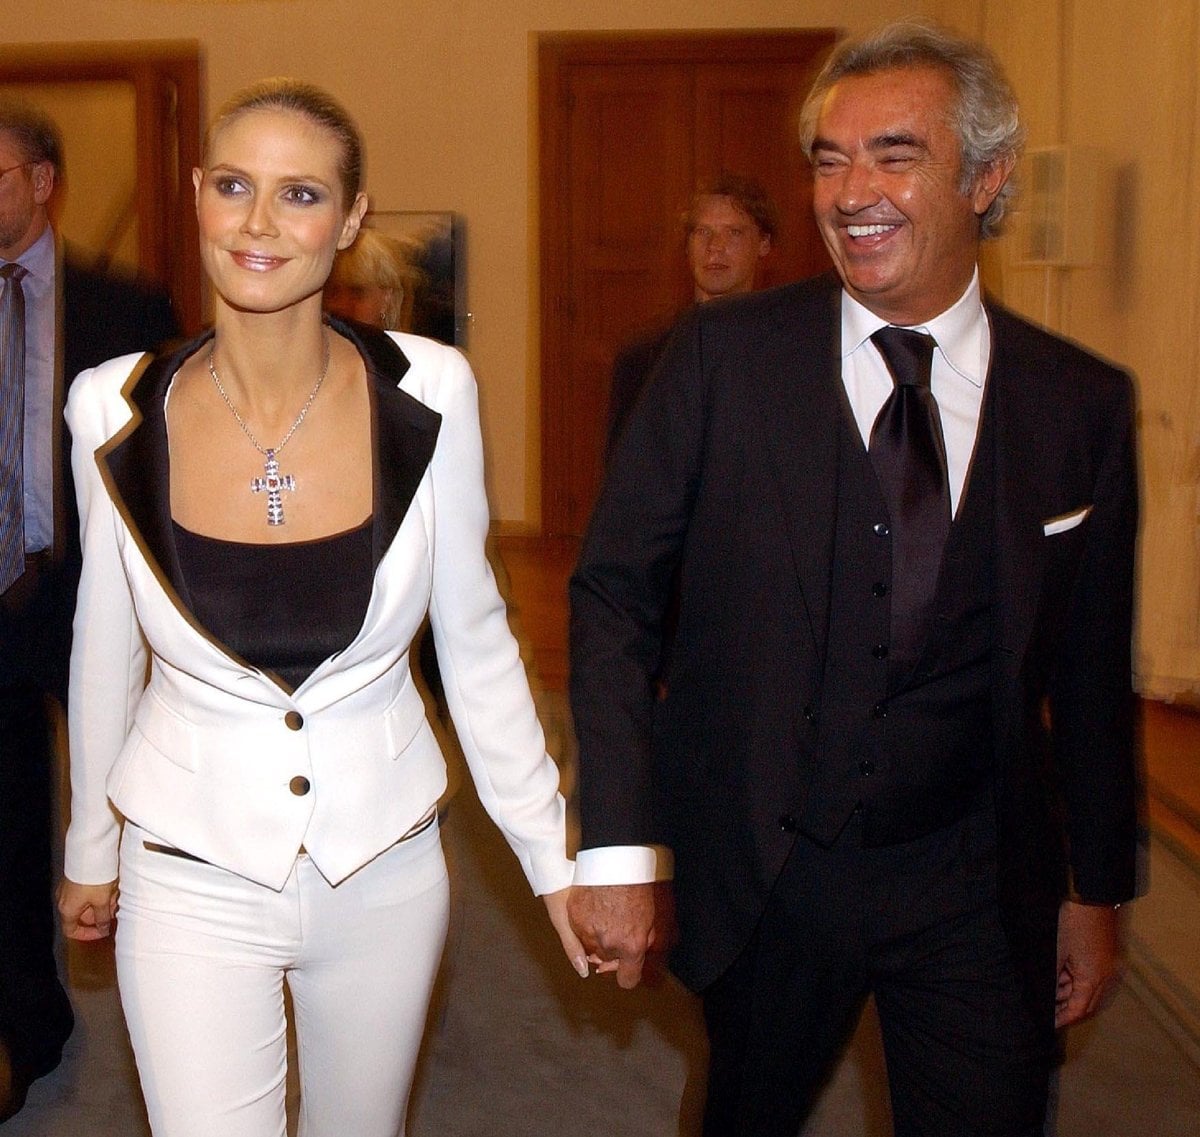 Heidi Klum and boyfriend Flavio Briatore at a charity gala for the German children and youth fund